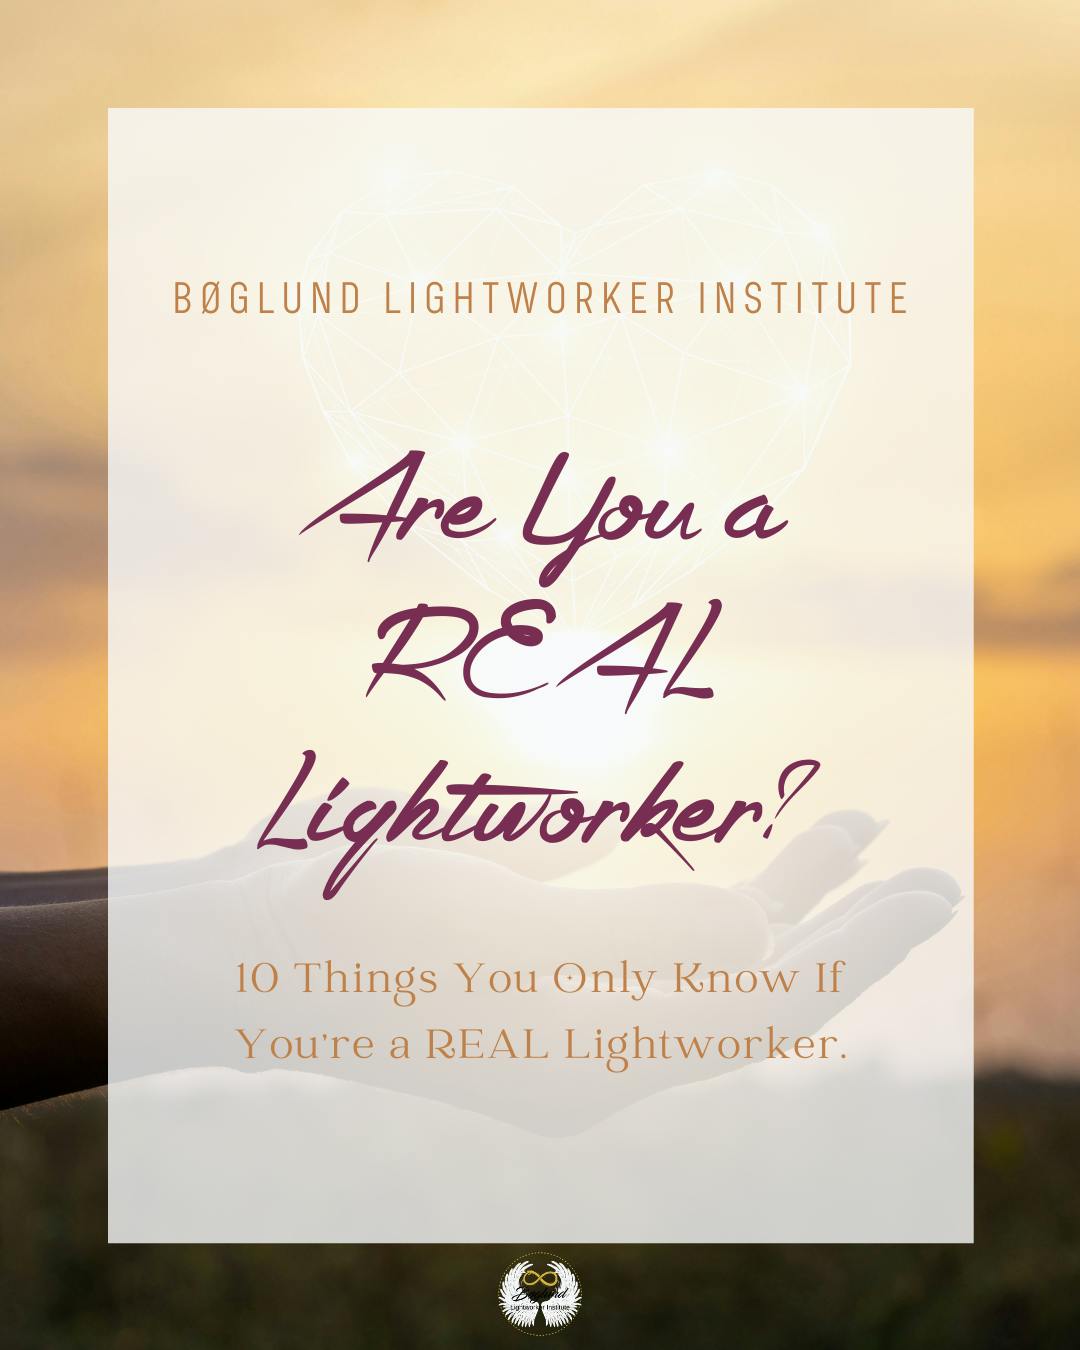 [Guide] 10 Things You Only Know If You're a REAL Lightworker